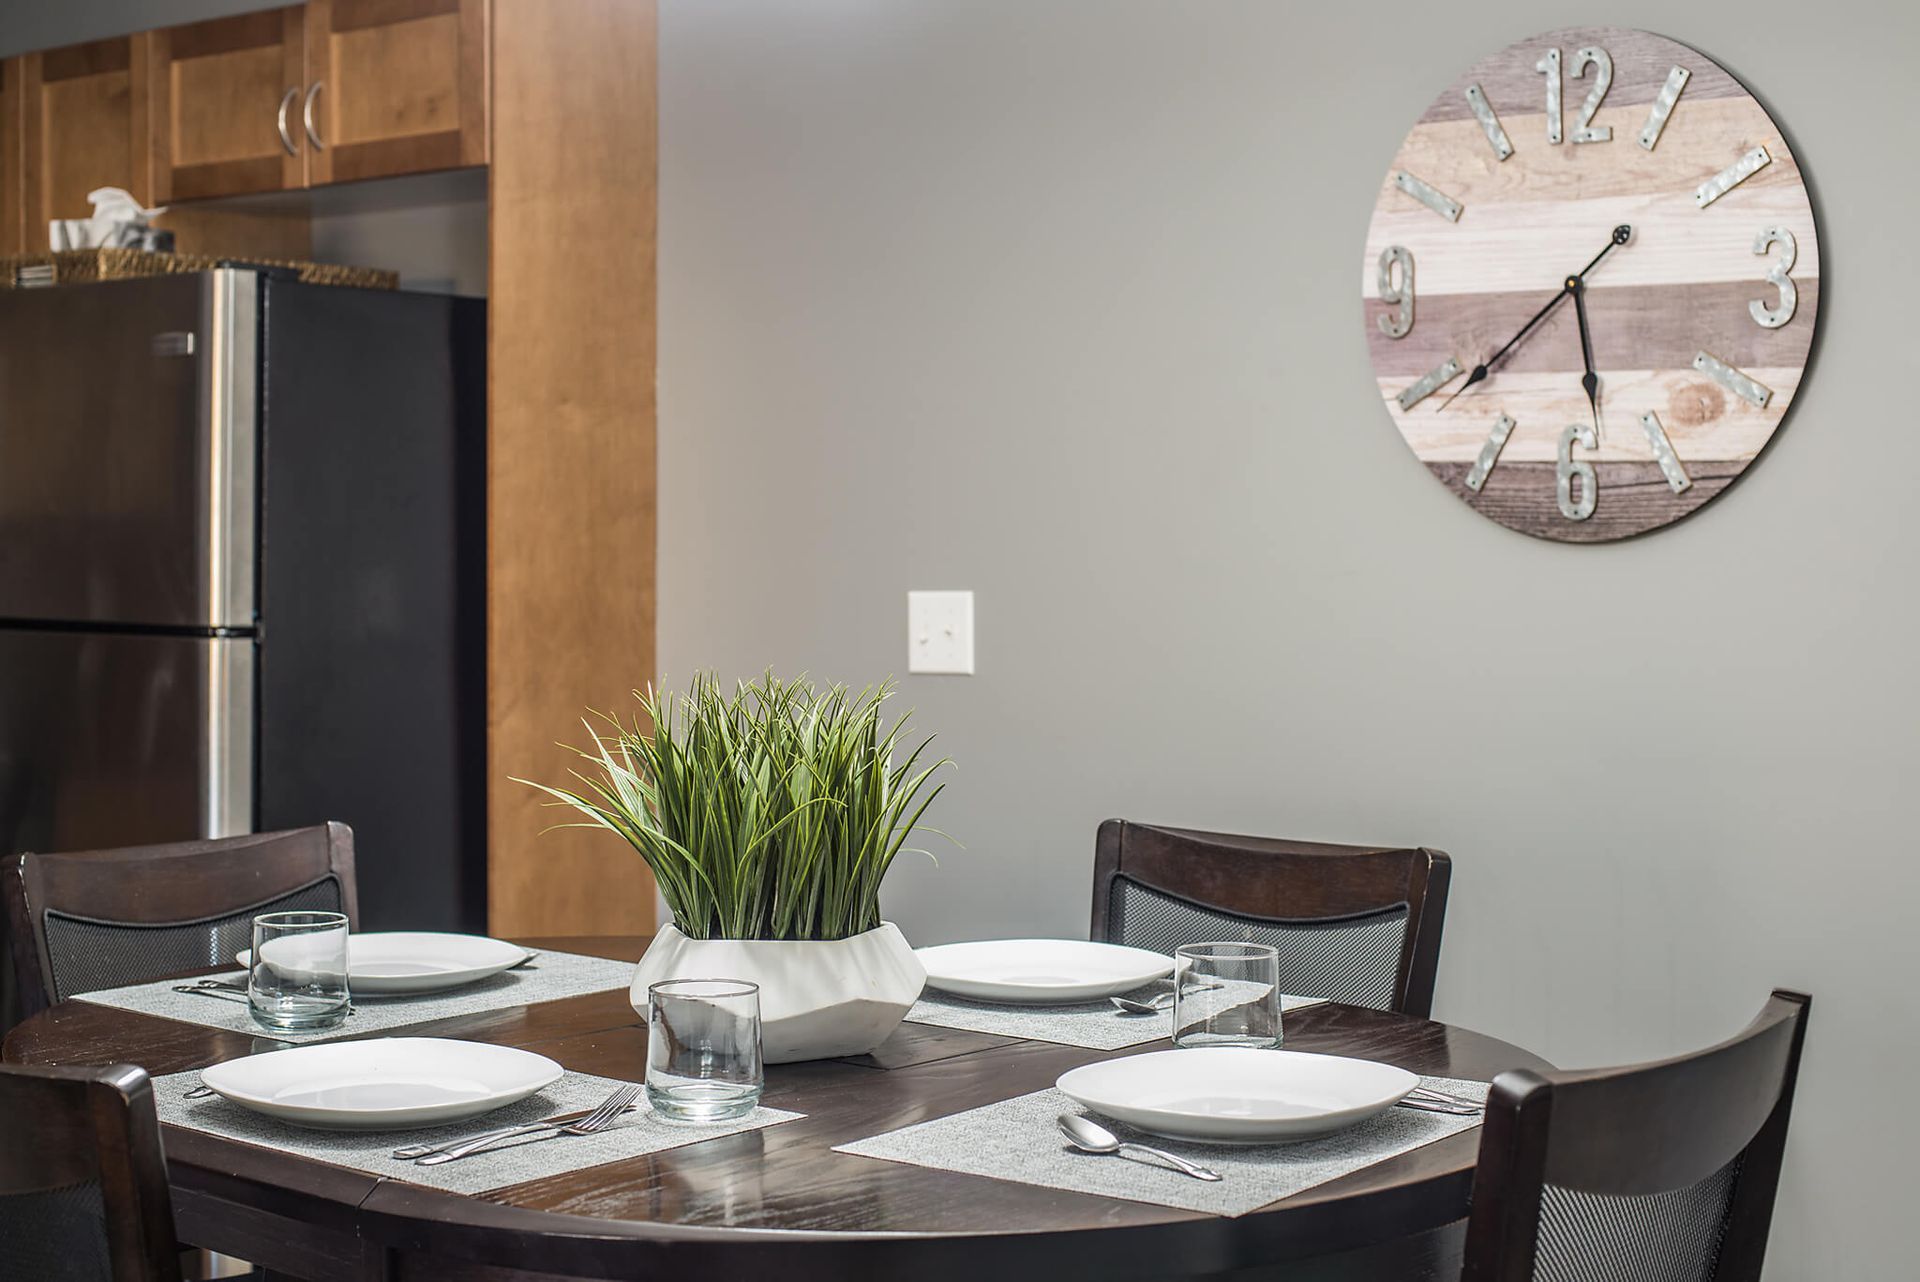 Dining area in the lake view condo in Lake Windermere Pointe BC Vacation Rental in Invermere hosted by Aisling Baile Property Management. 